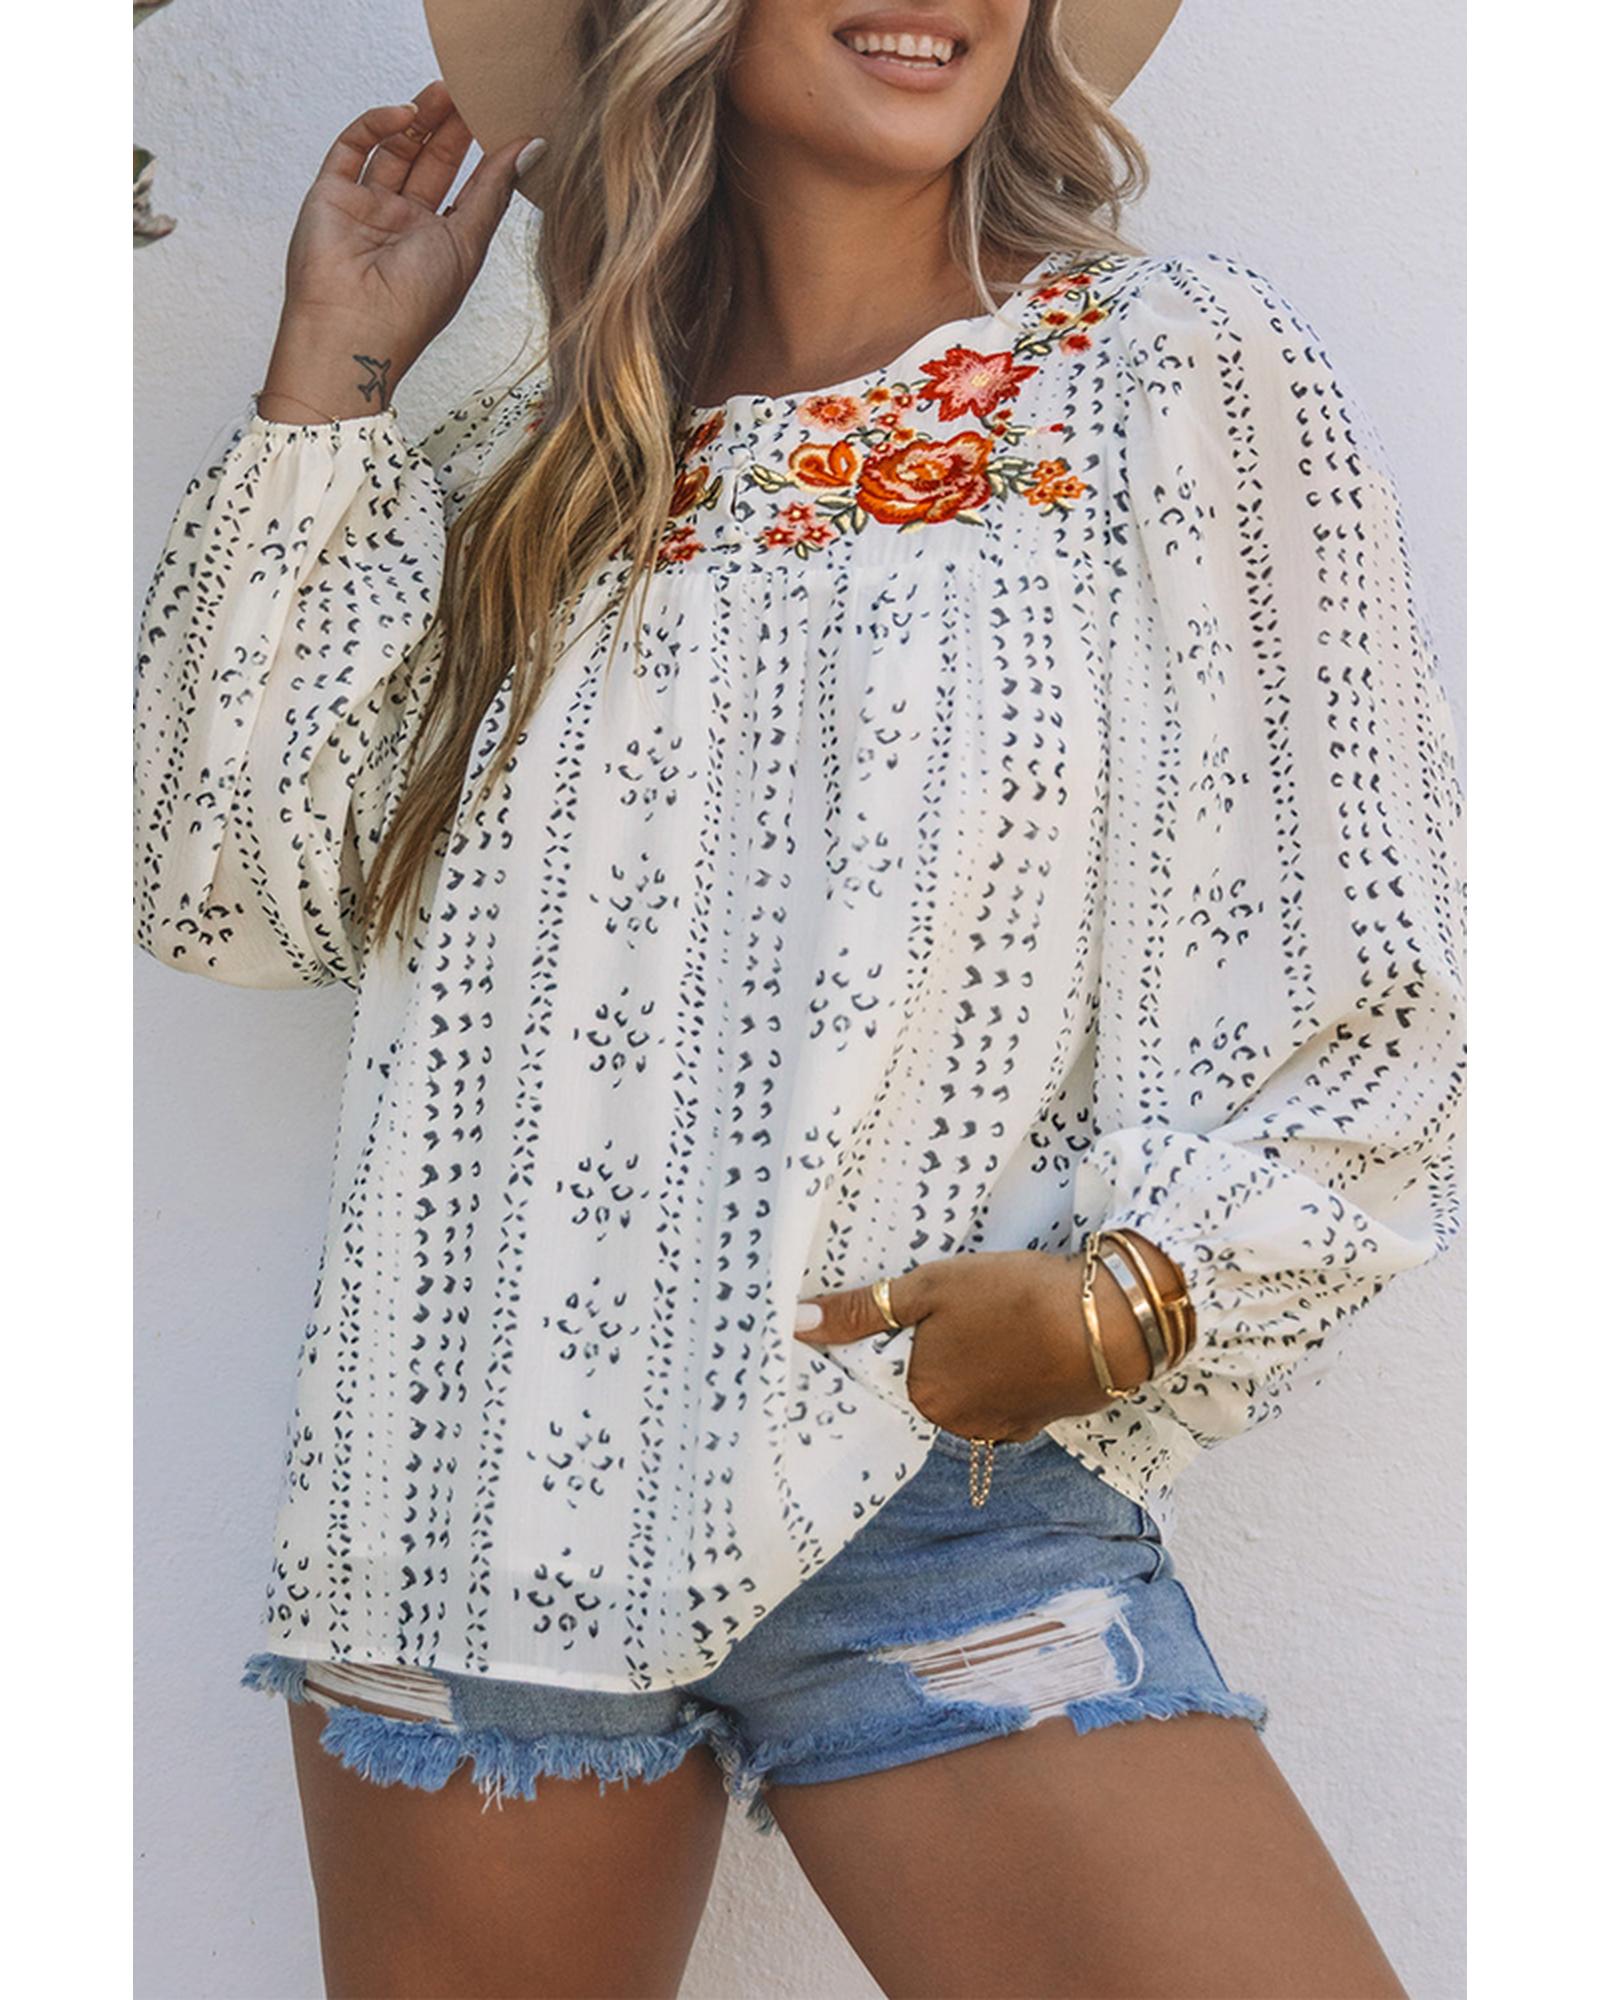 Azura Exchange Long Sleeve Embroidered Print Blouse - M